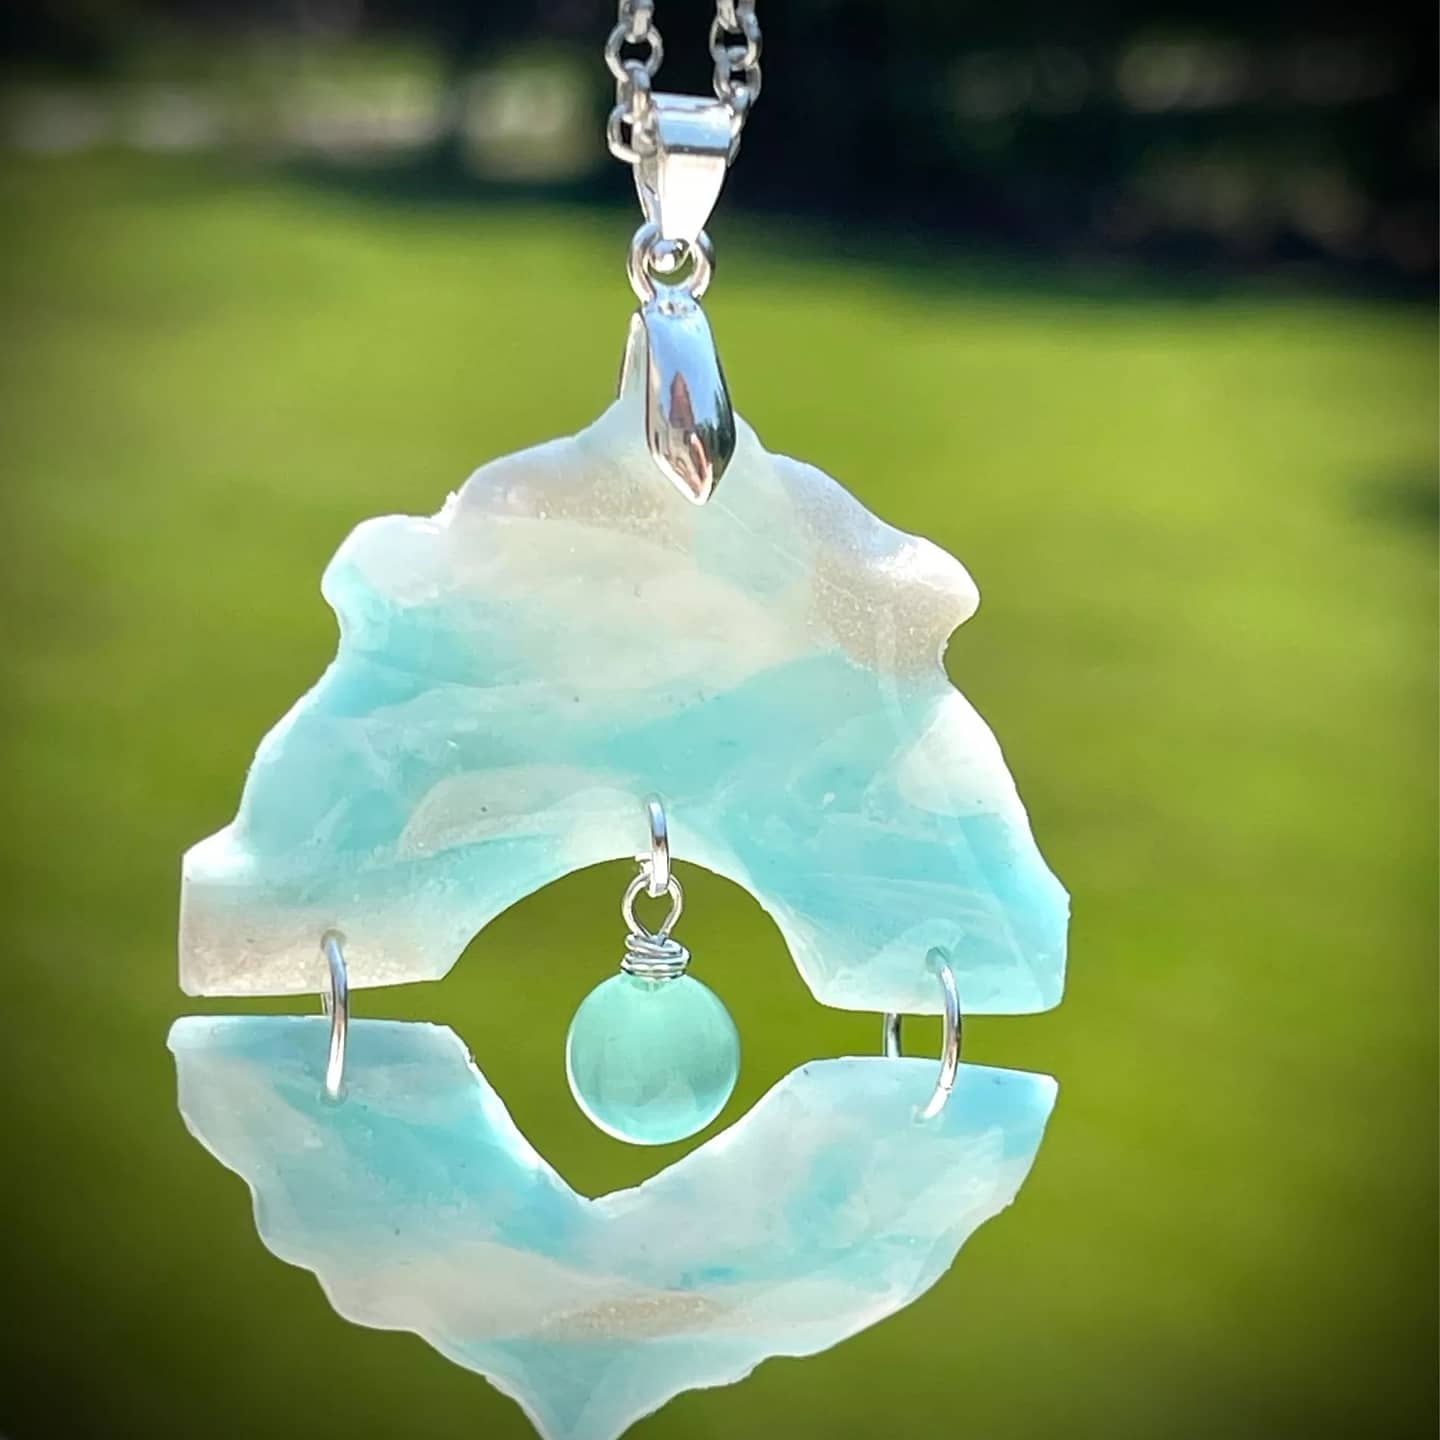 Which is the clearest Translucent Polymer Clay? - The Blue Bottle Tree